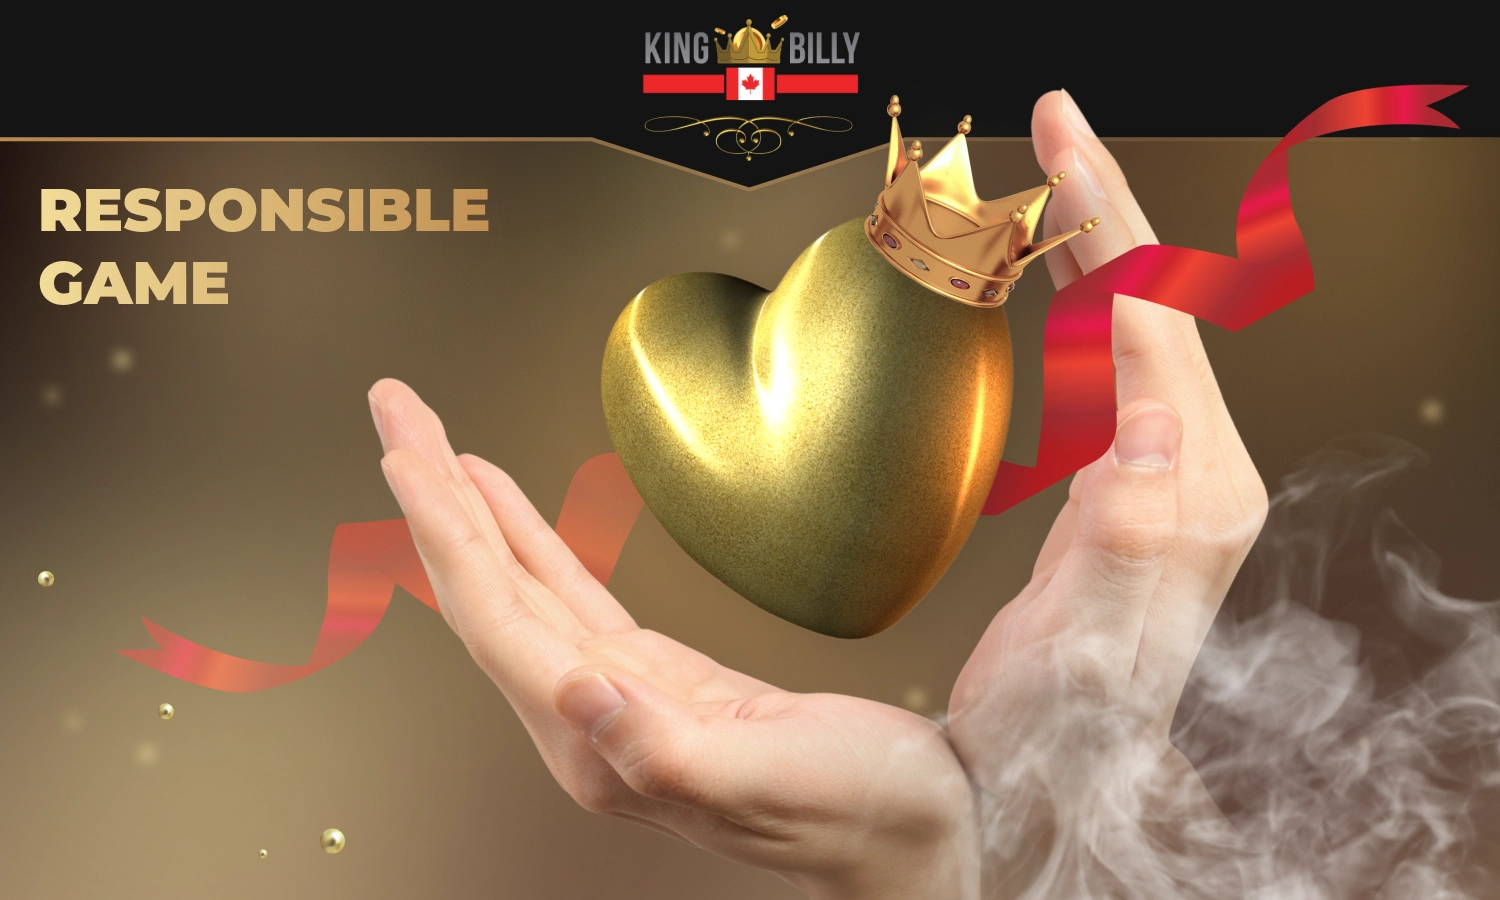 King Billy Casino takes care of its Canadian players and prevents gambling addiction